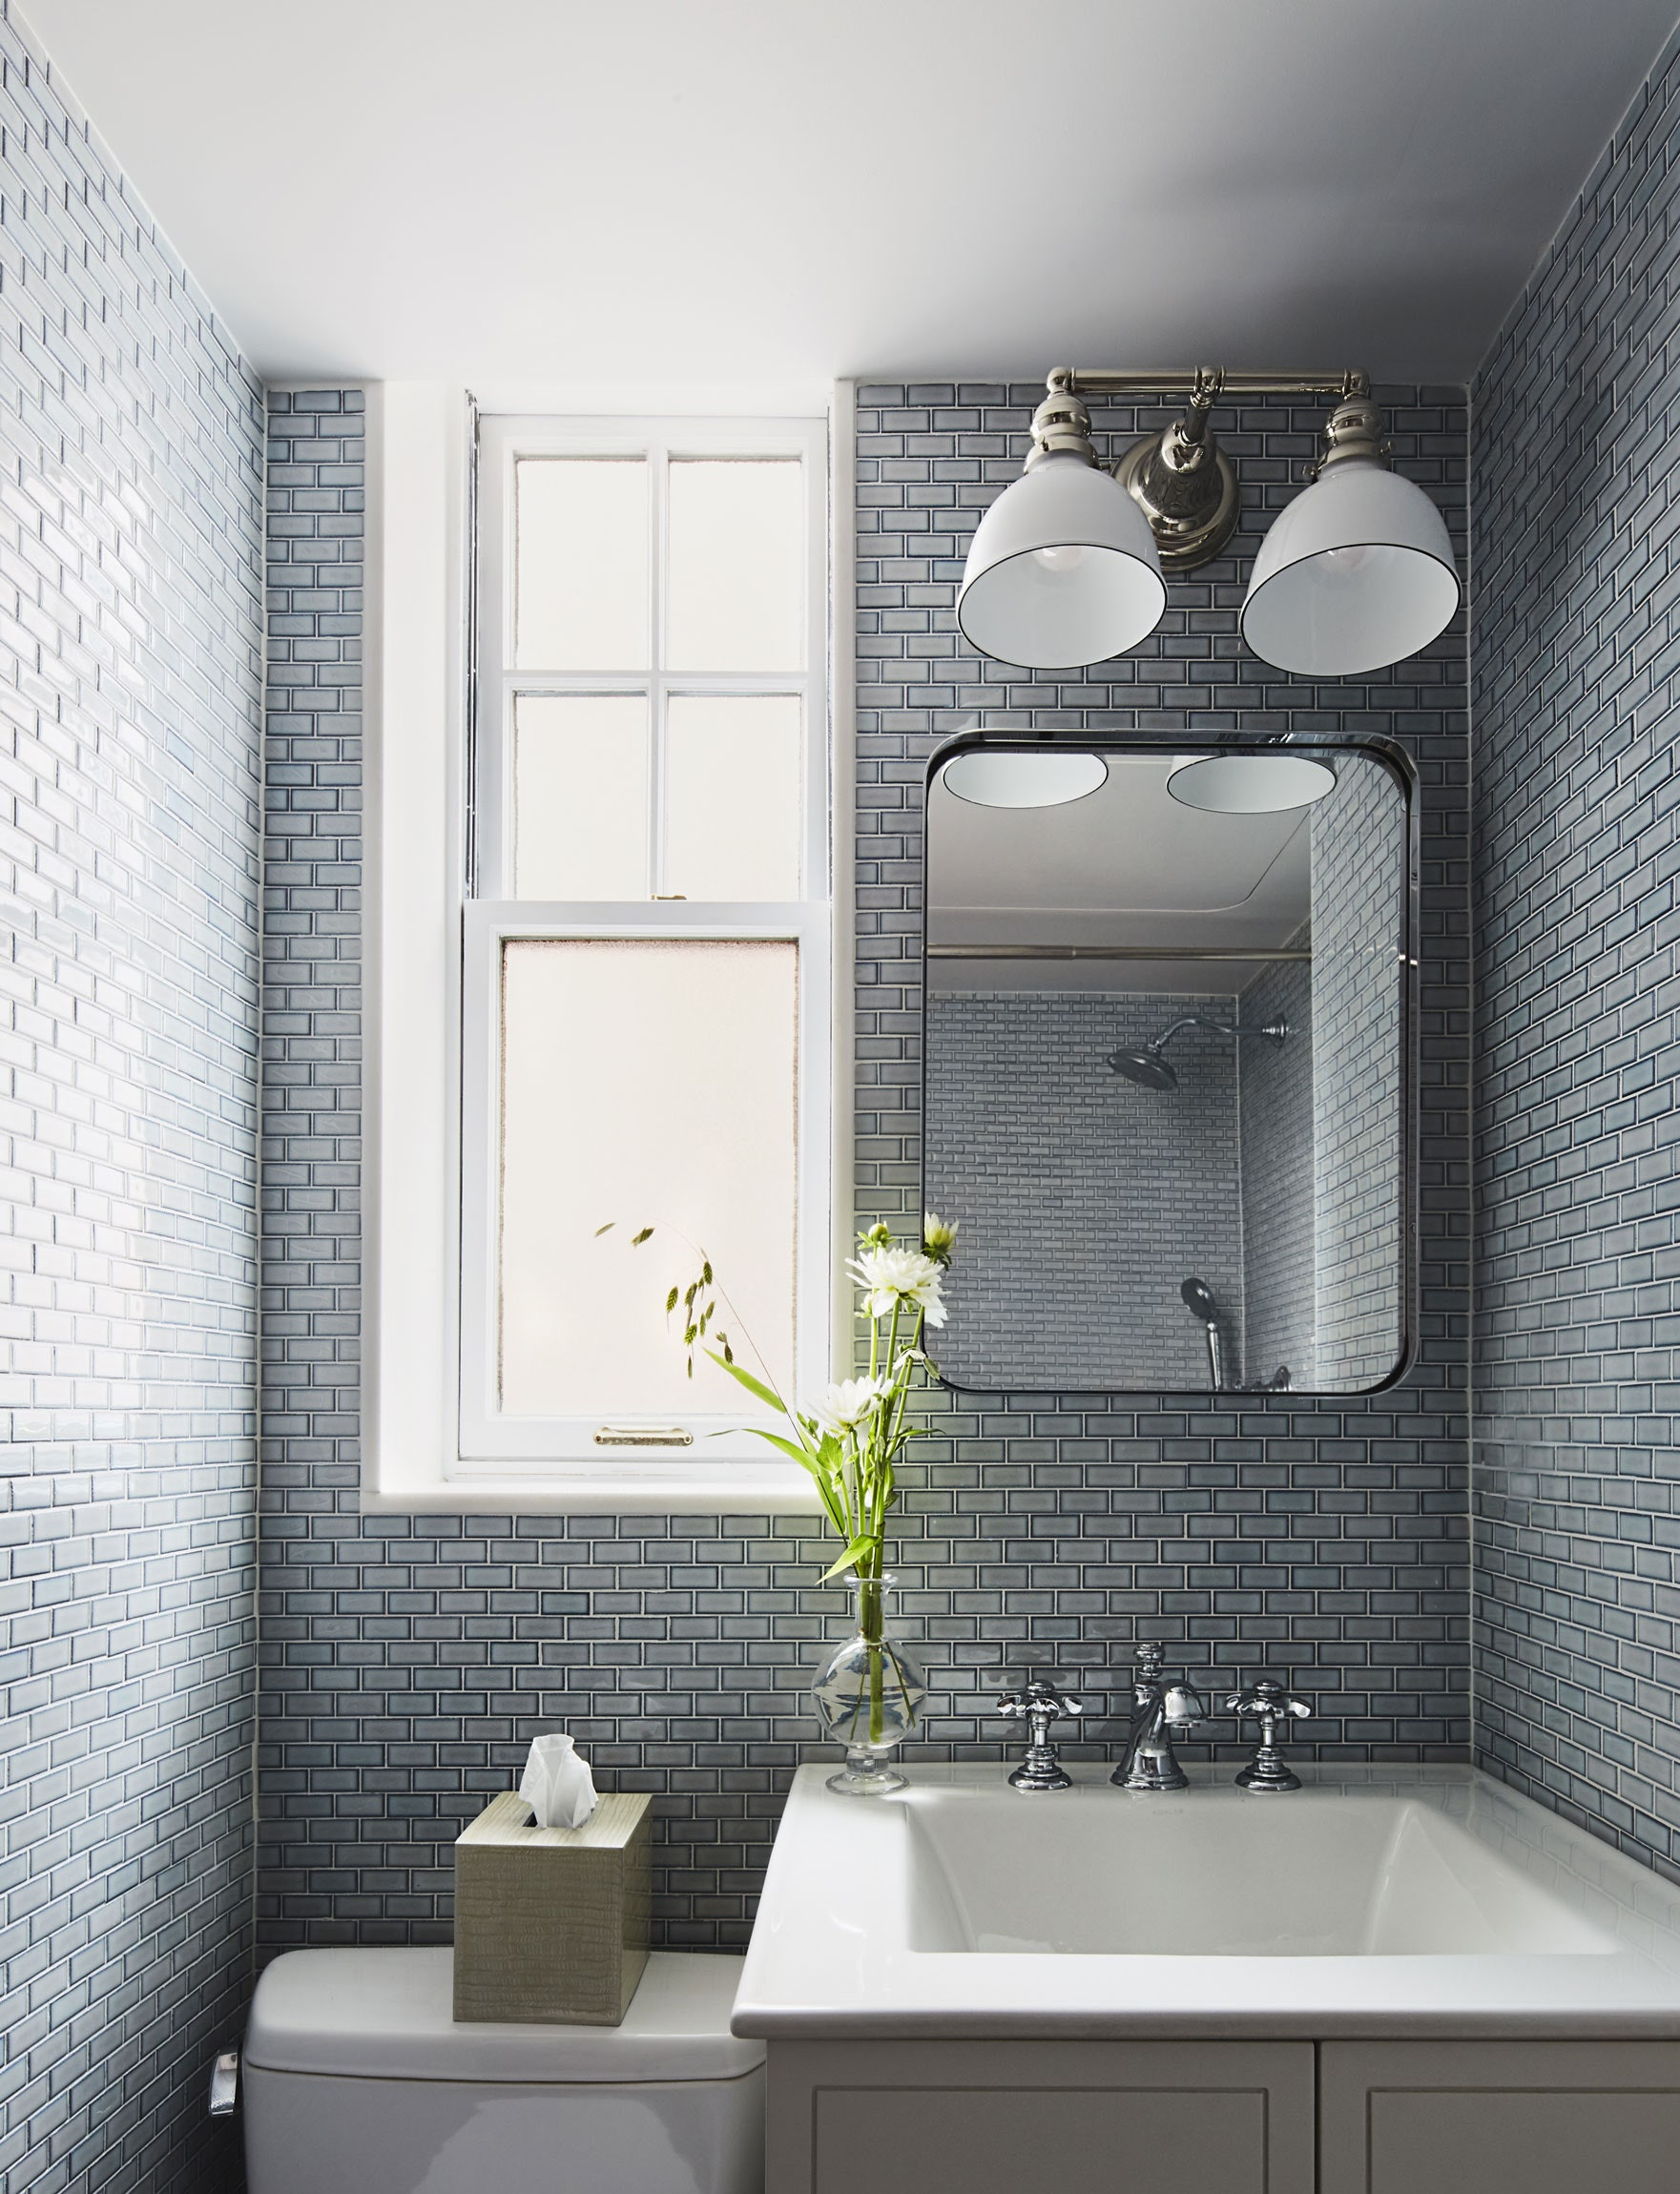 Bathroom Ideas With Tiles
 This Bathroom Tile Design Idea Changes Everything